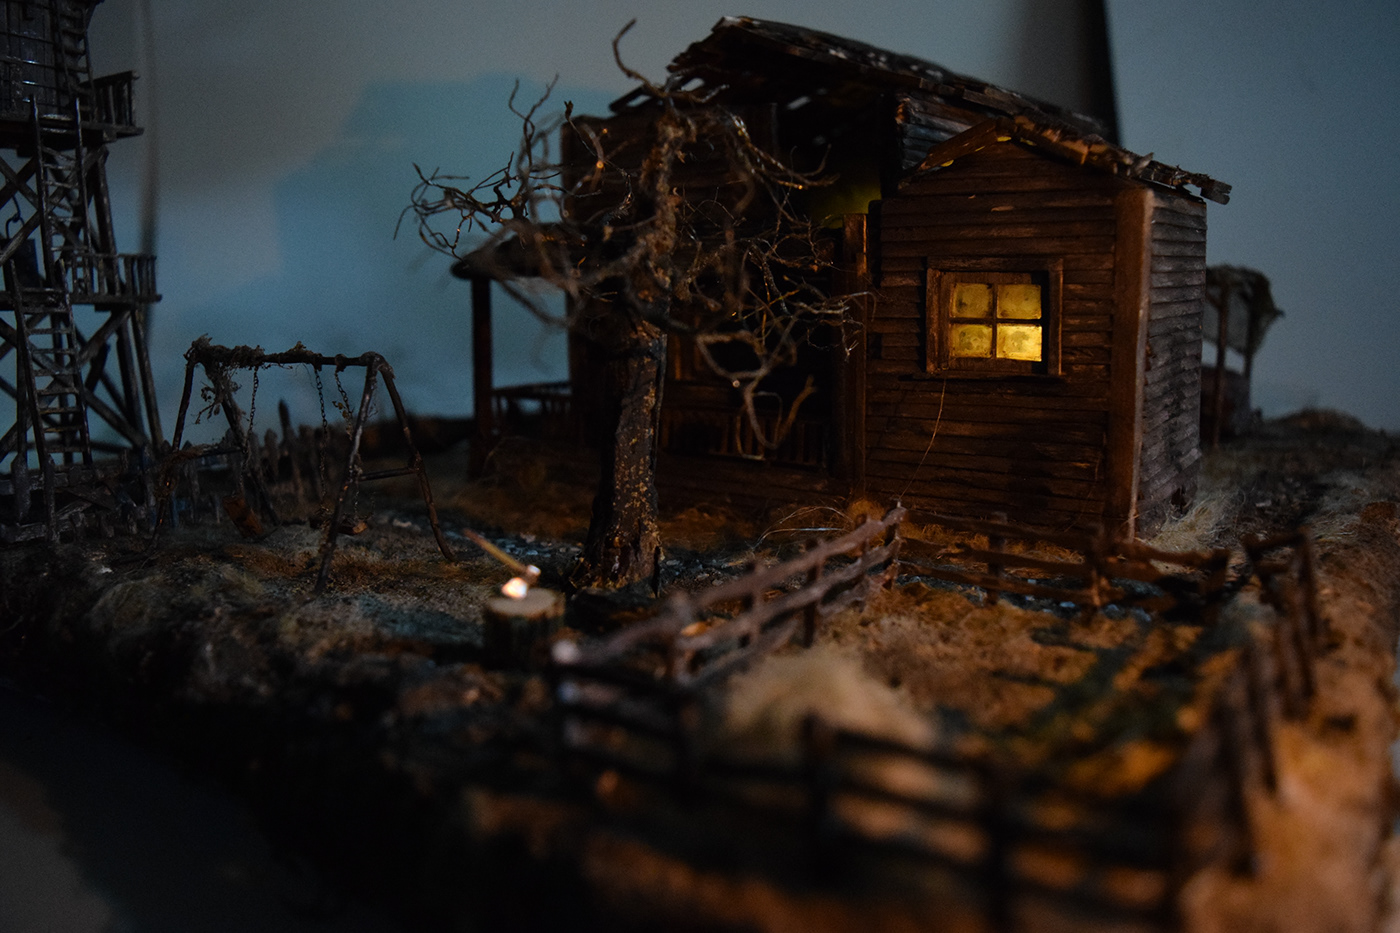 Mockup maquette art artist Real stopmotion animation 